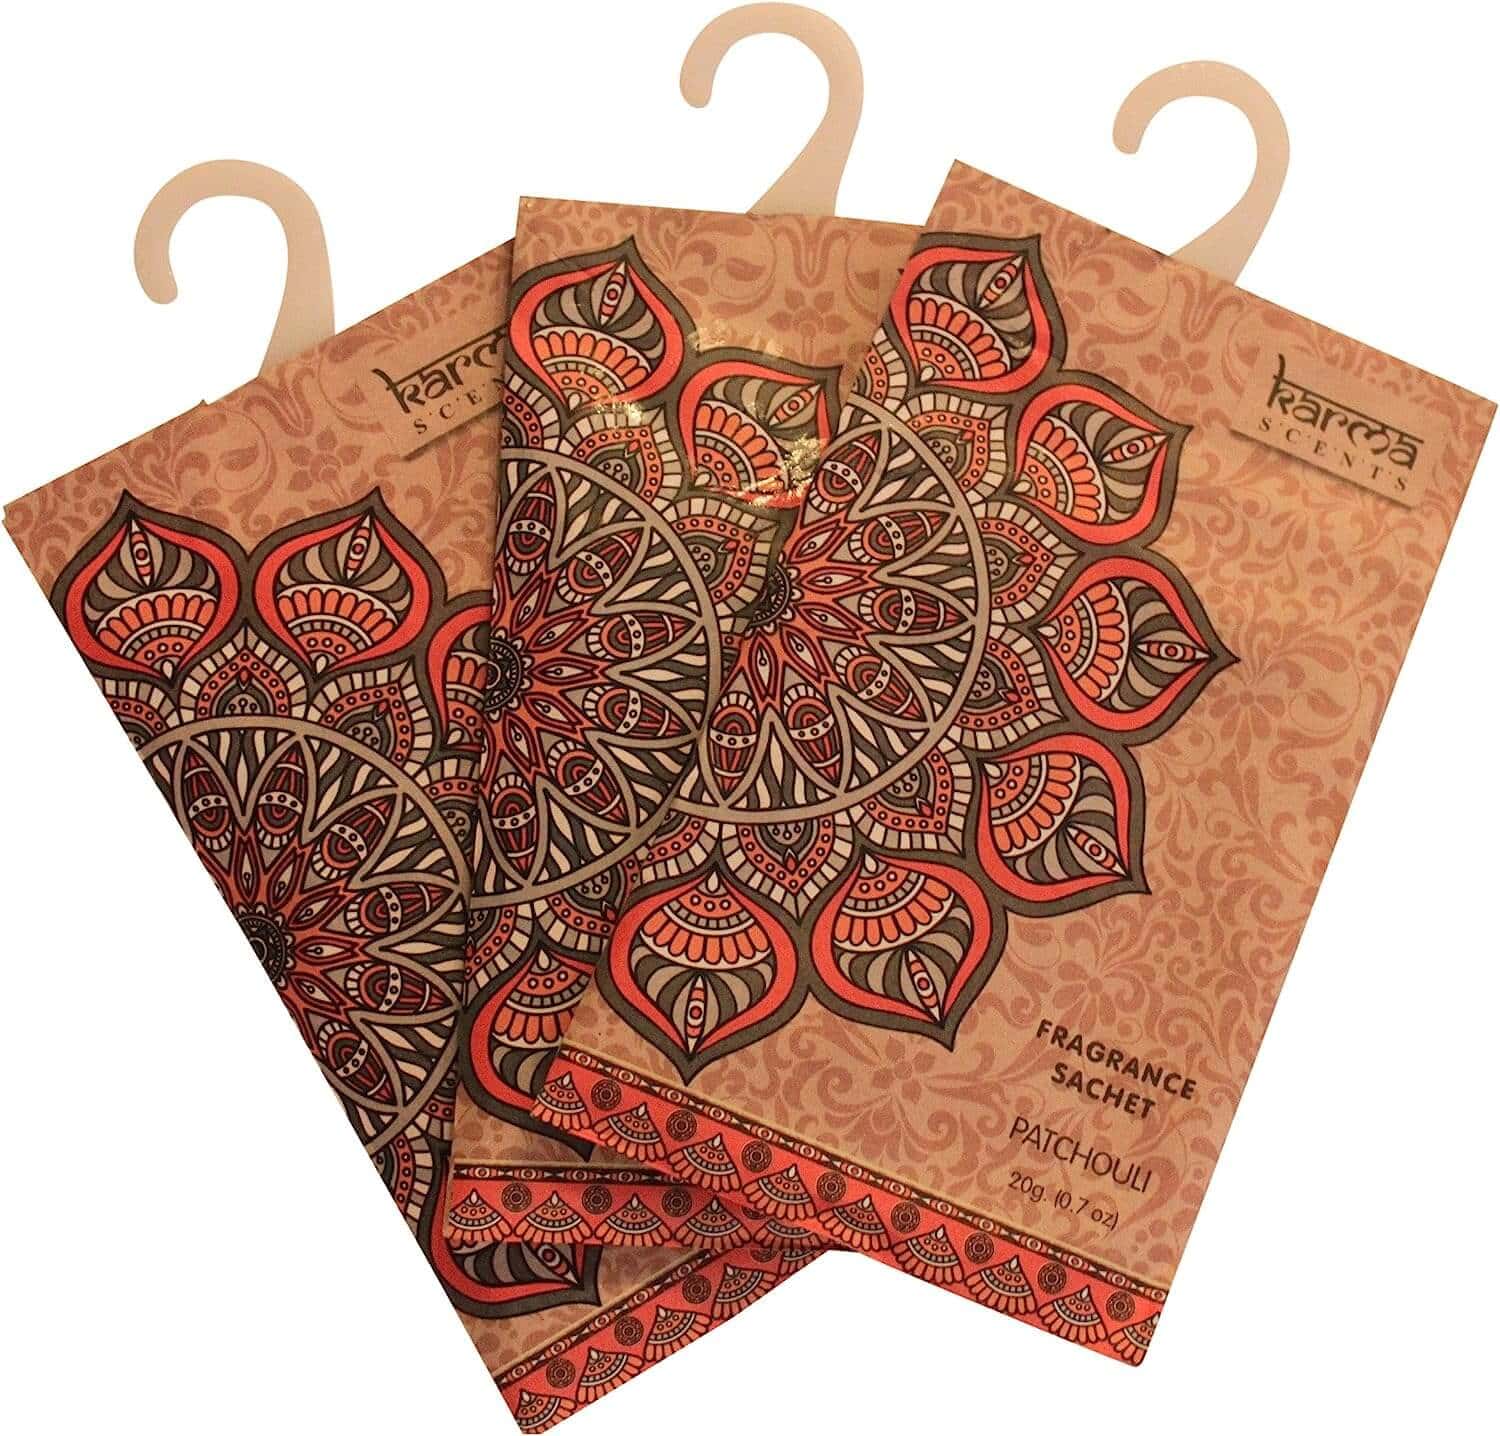 three pieces patchouli scented sachets